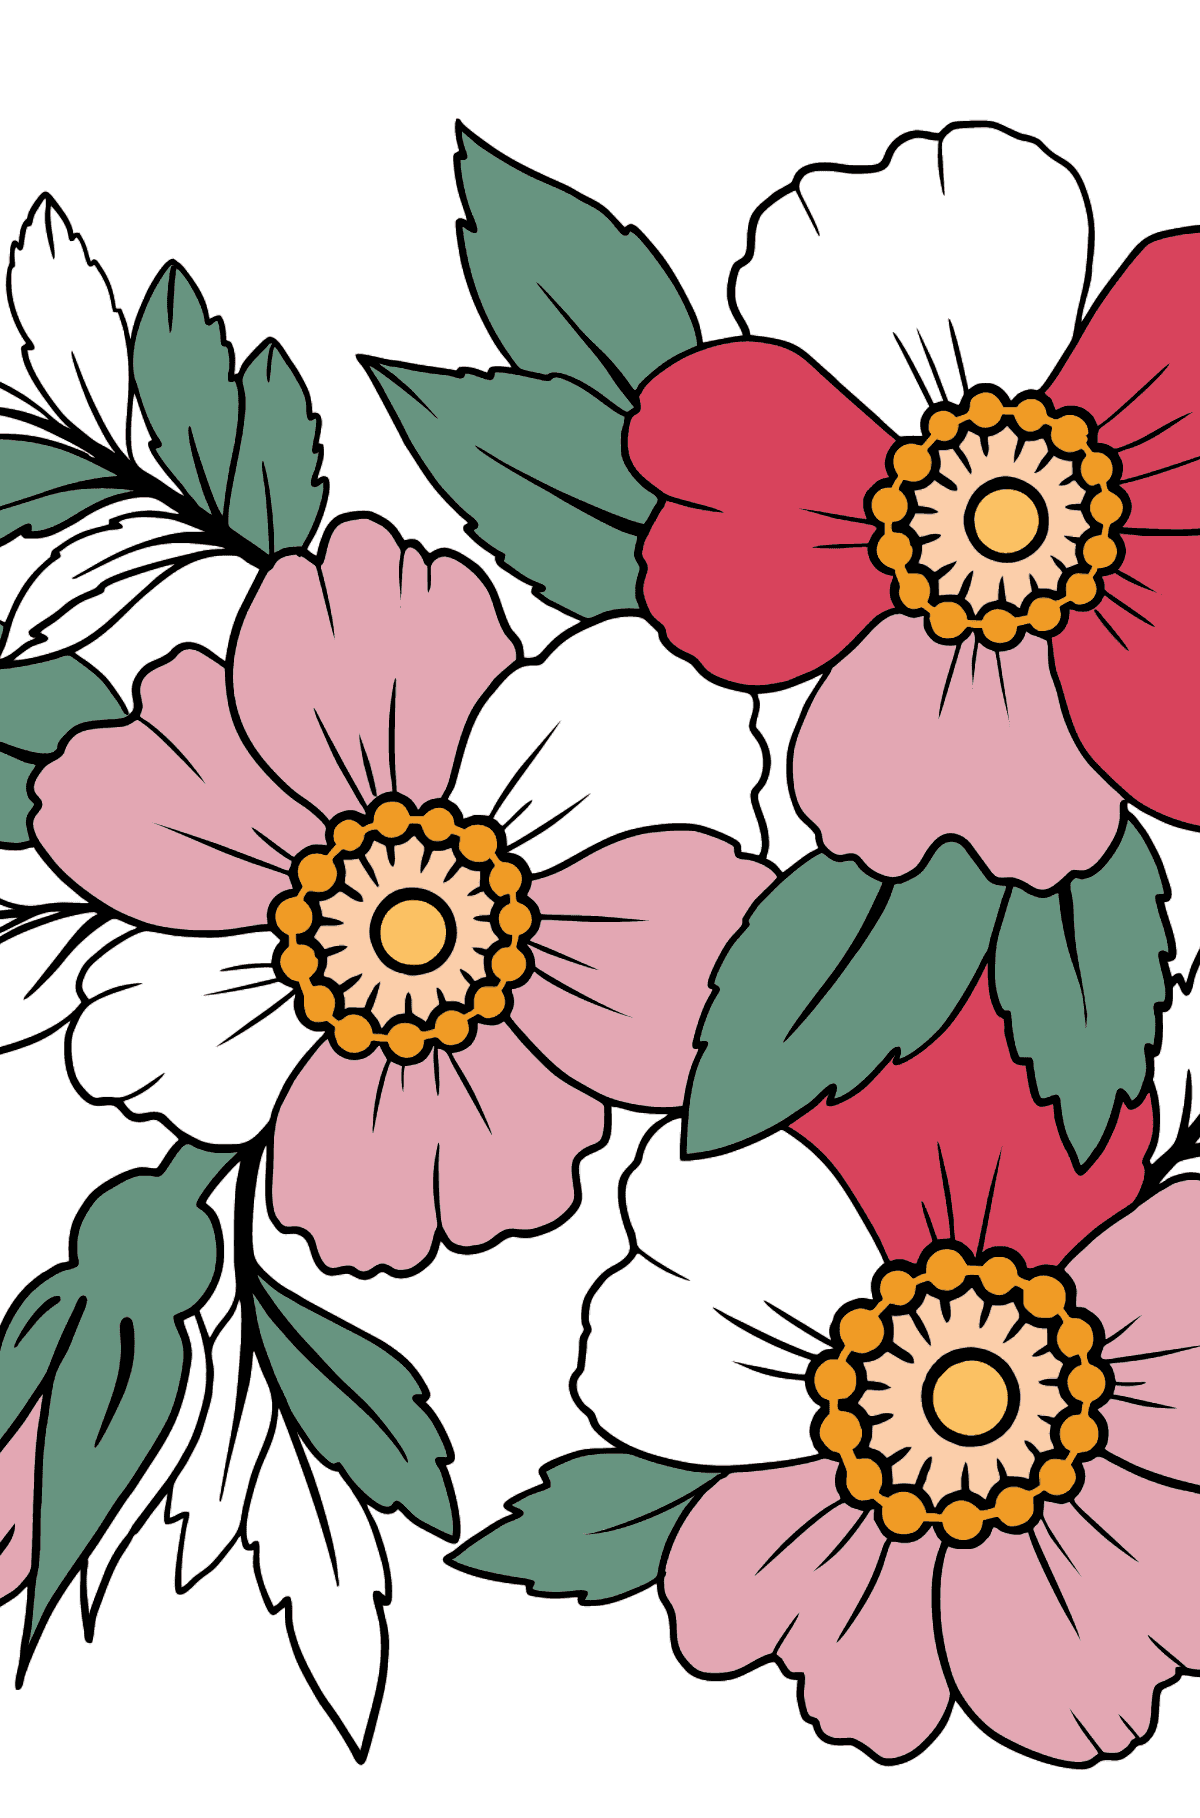 Flower Coloring Page - Japanese Anemone - Coloring Pages for Kids